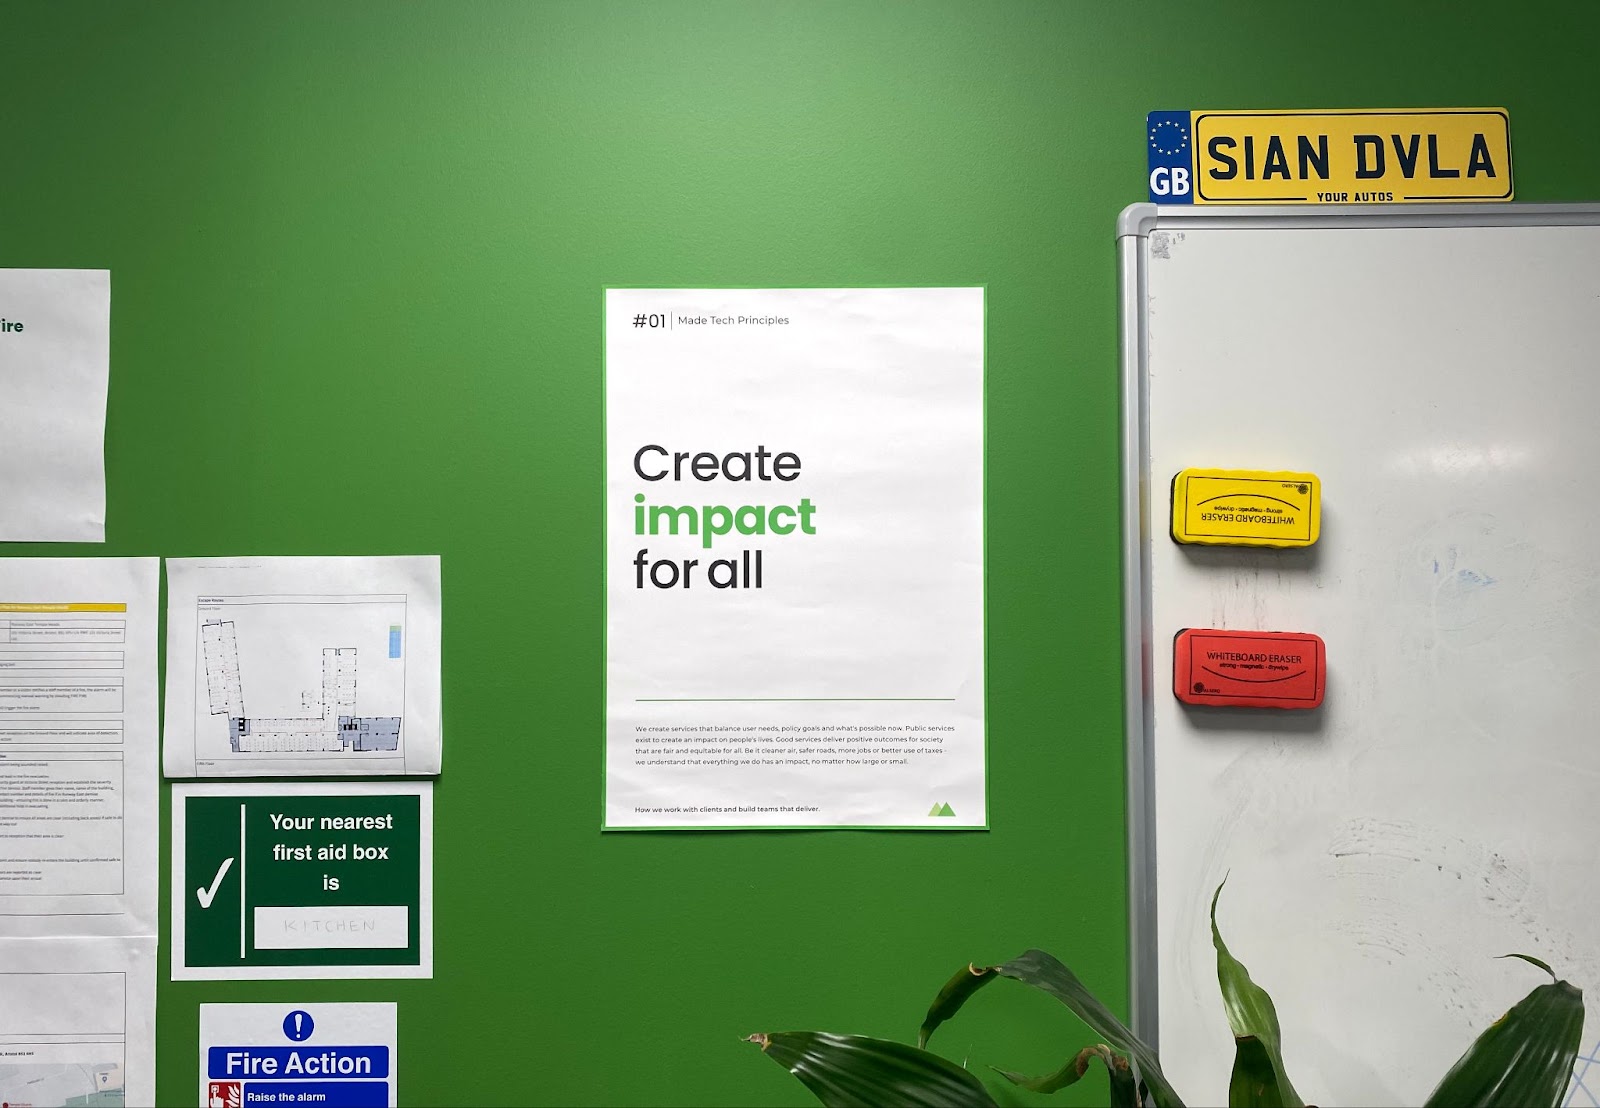 In an office room with a green wall is a poster of the 'create impact for all' principle.